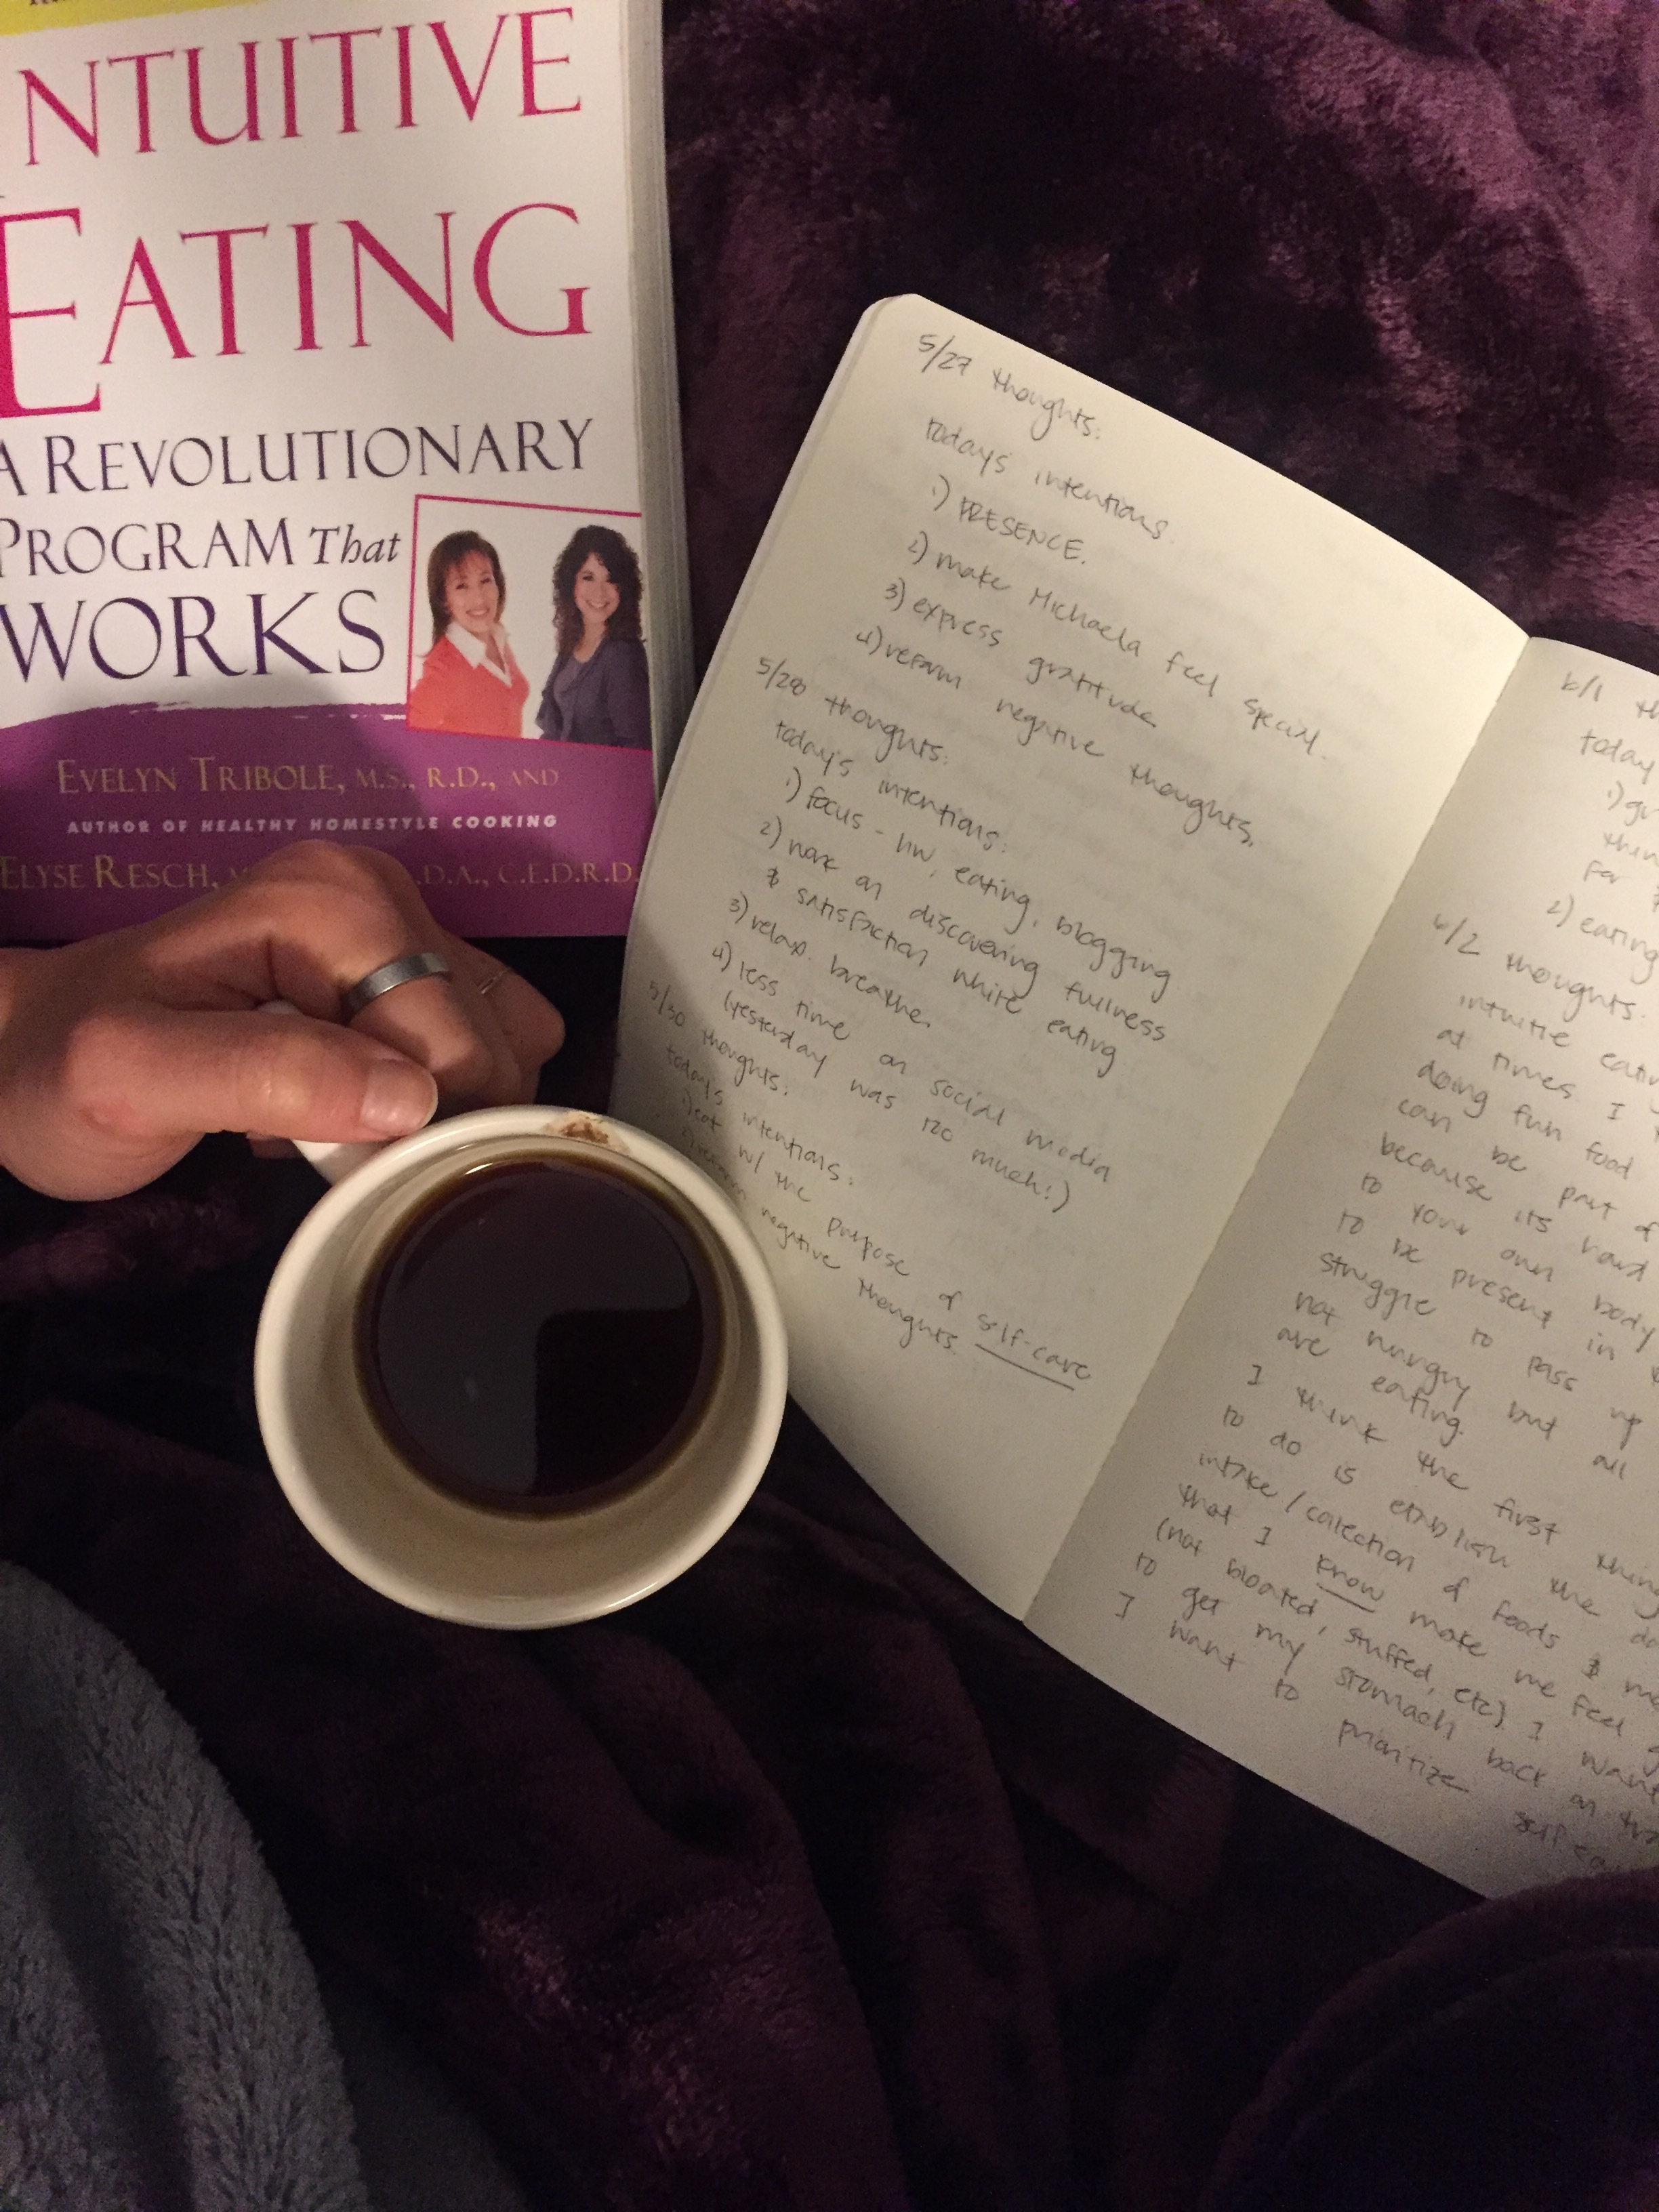 5 Things (Workouts, Friends and Food, Morning Reading, Blogging)